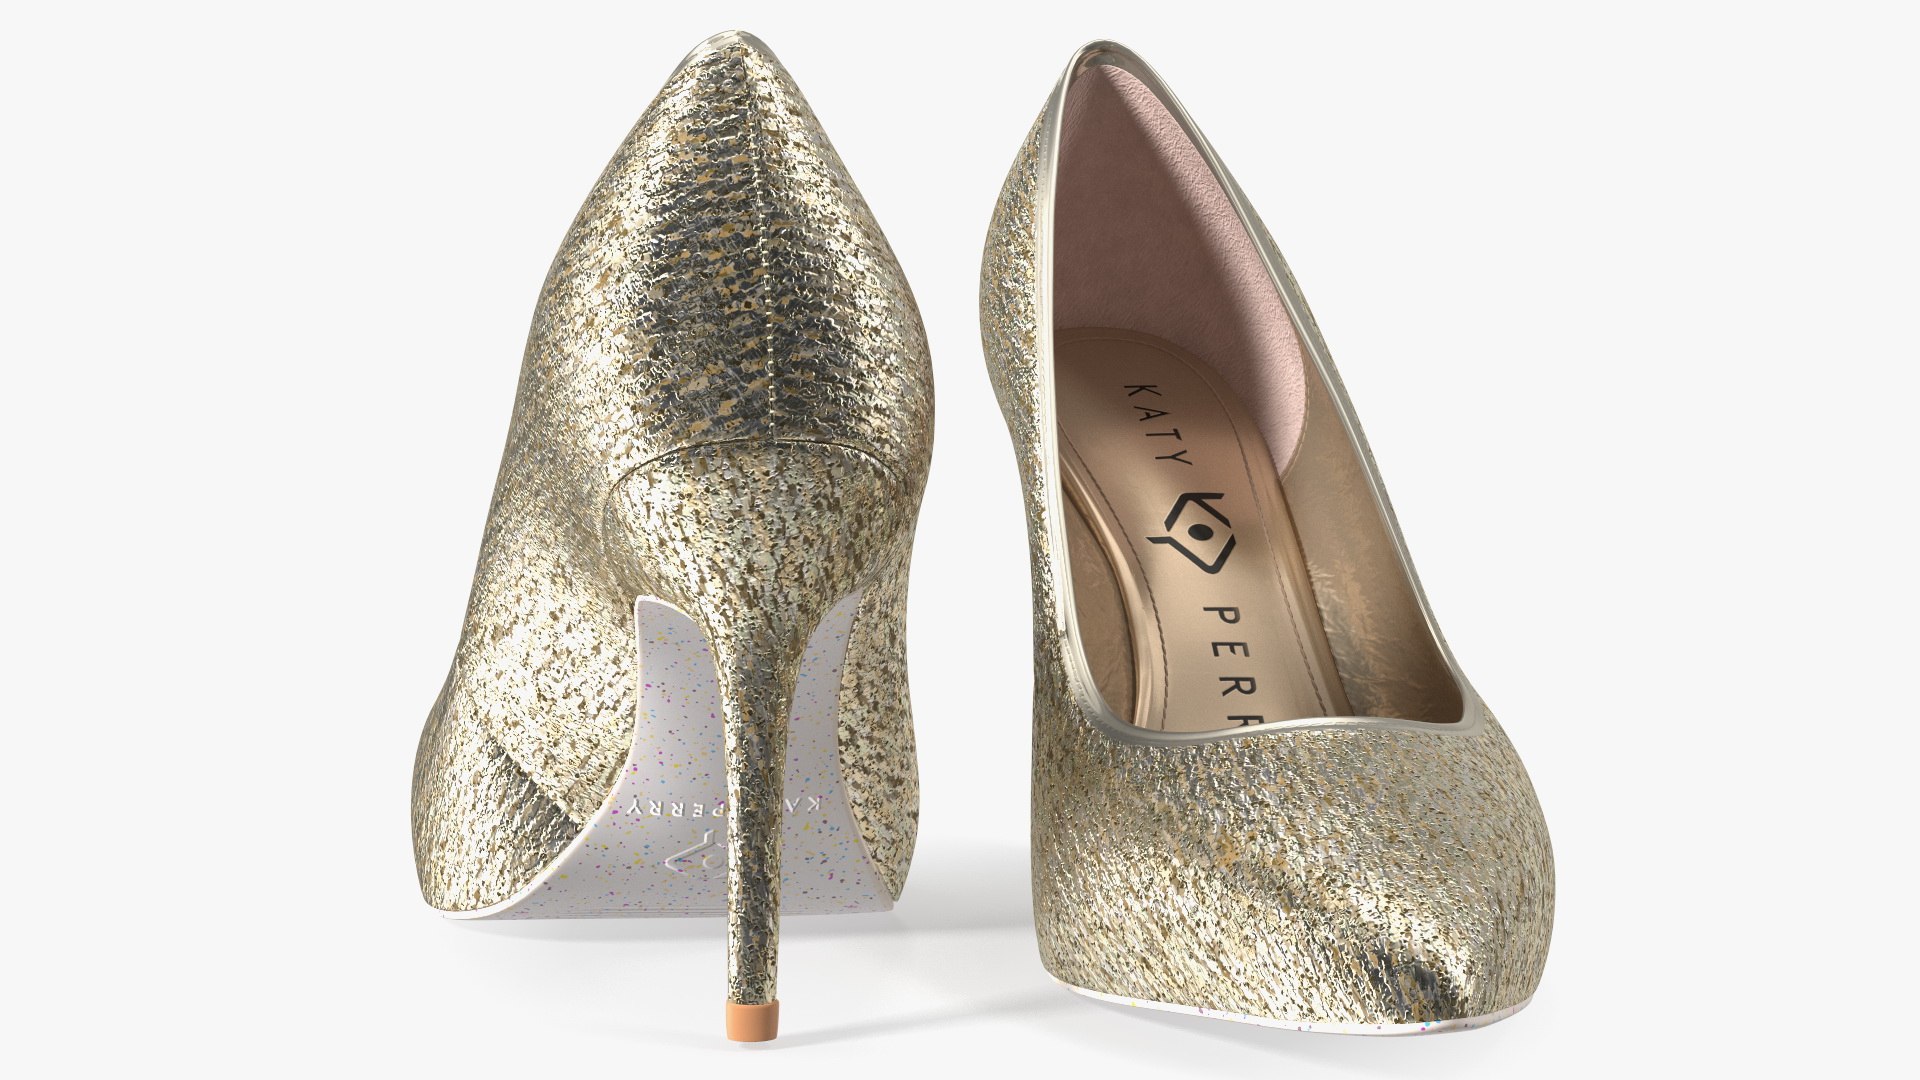 Katy Perry Sparkly Sissy Pumps 3D model - TurboSquid 1831689